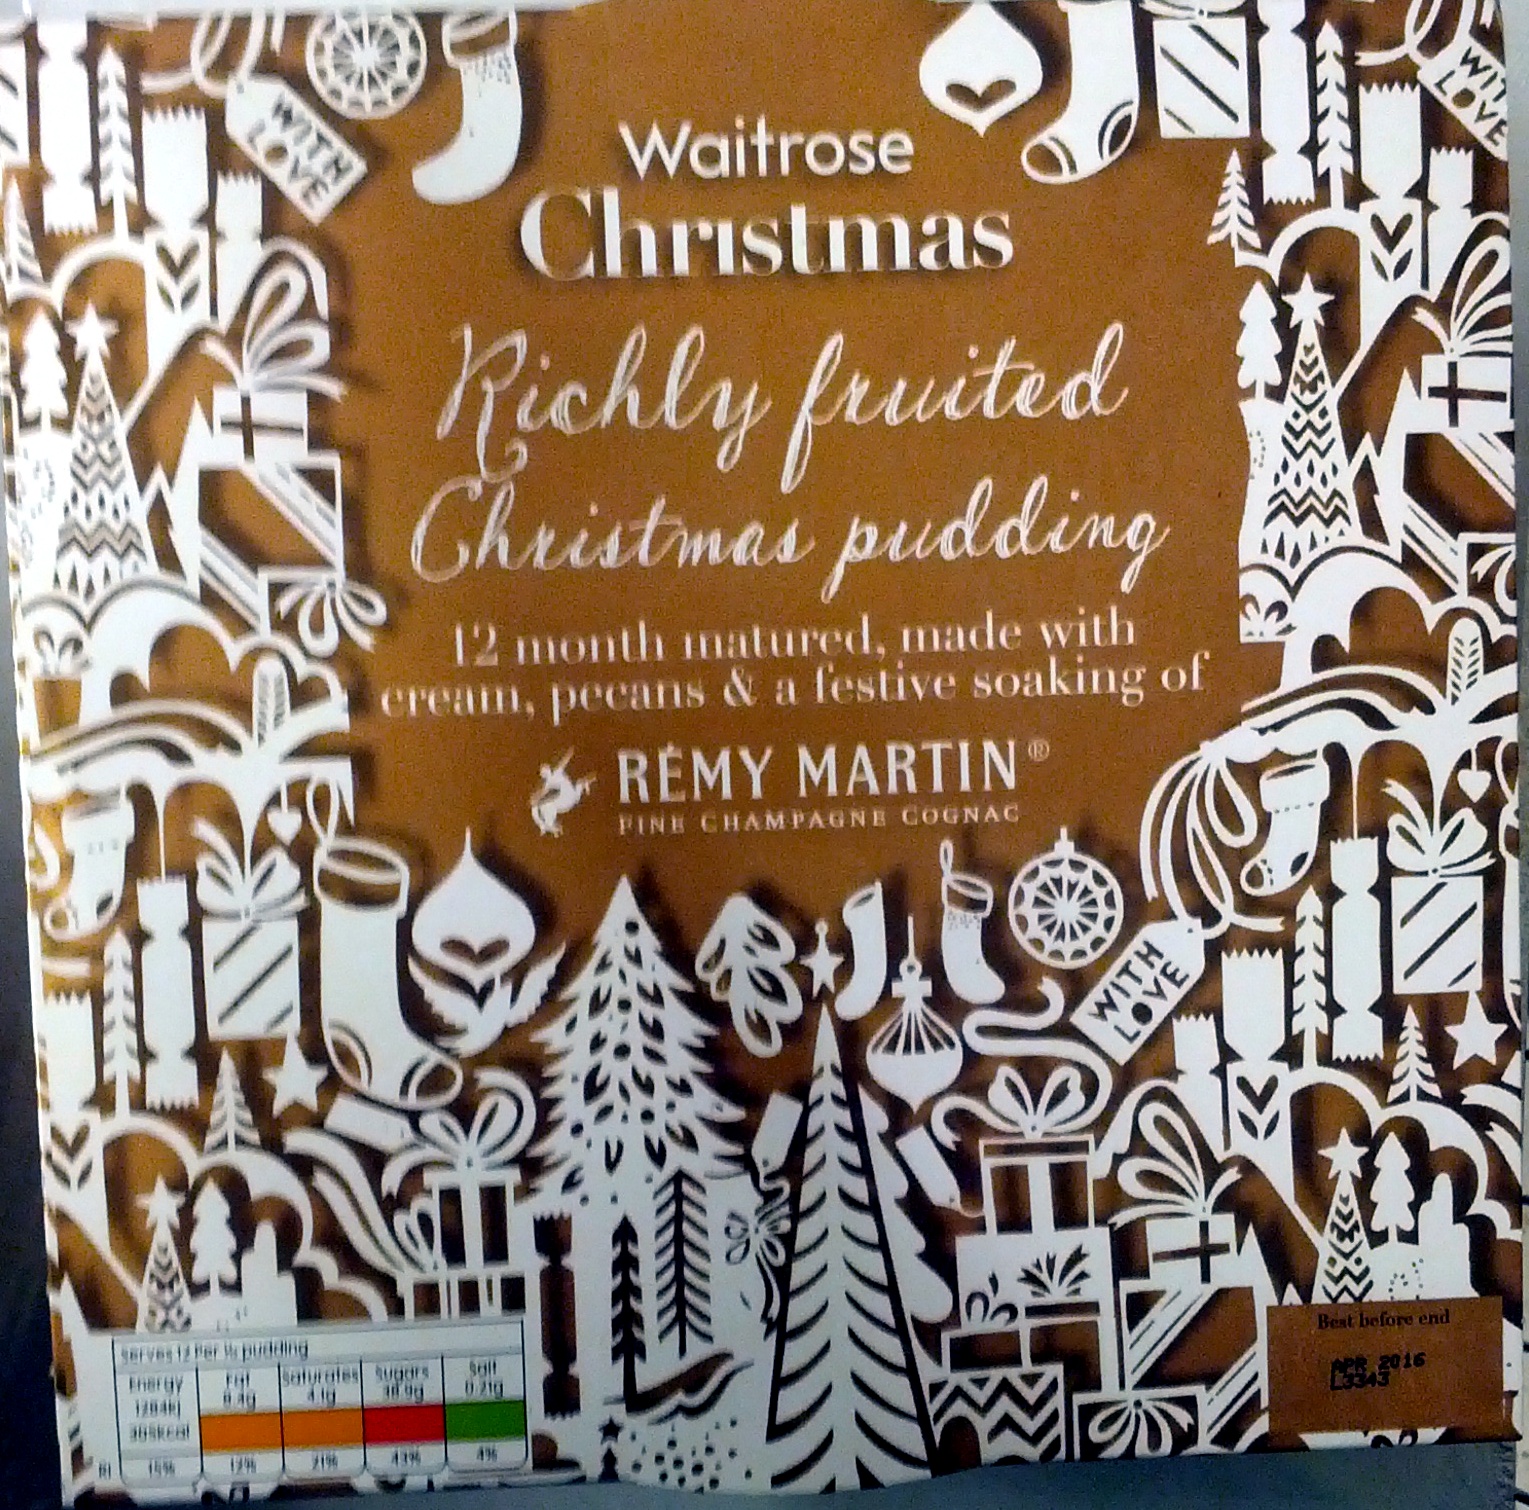 Richly Fruited Christmas Pudding 12 months matured, made with cream, pecans and a festive soaking of Rémy Martin Fine Champagne Cognac - Product